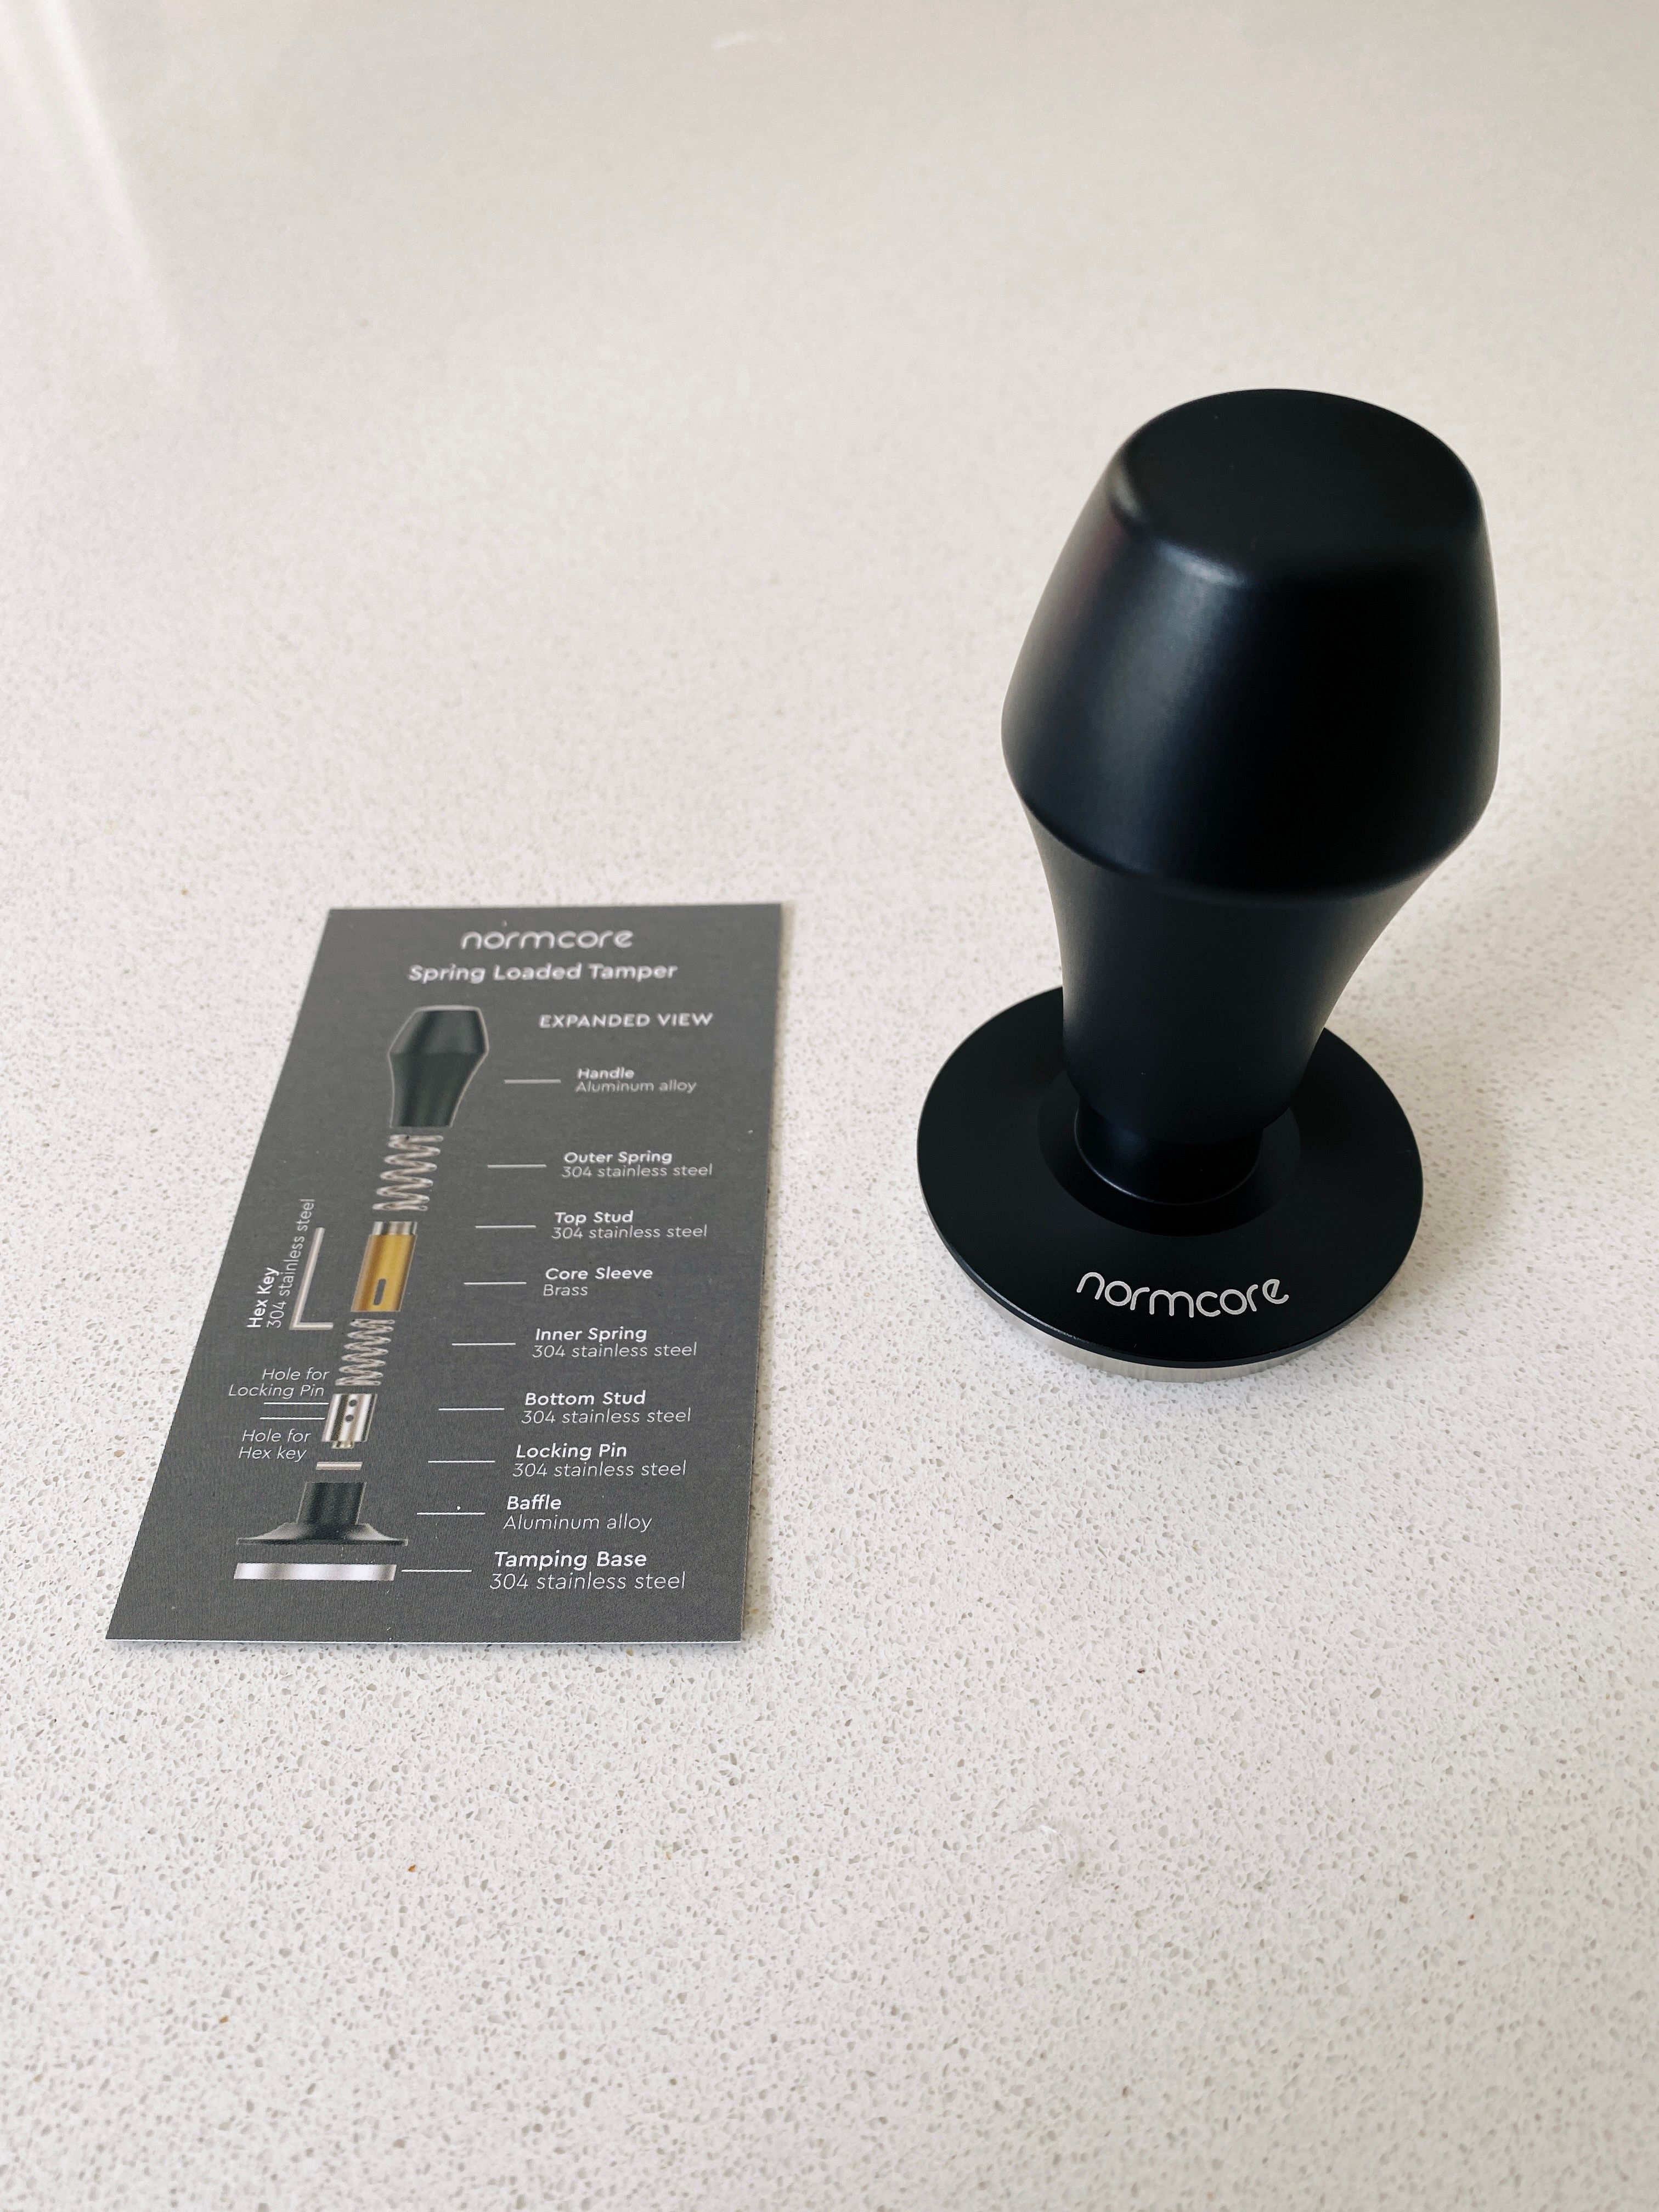 A photo of a black "Normcore" brand (yes, really) espresso tamper. It looks kind of alarmingly like a butt plug tbh.